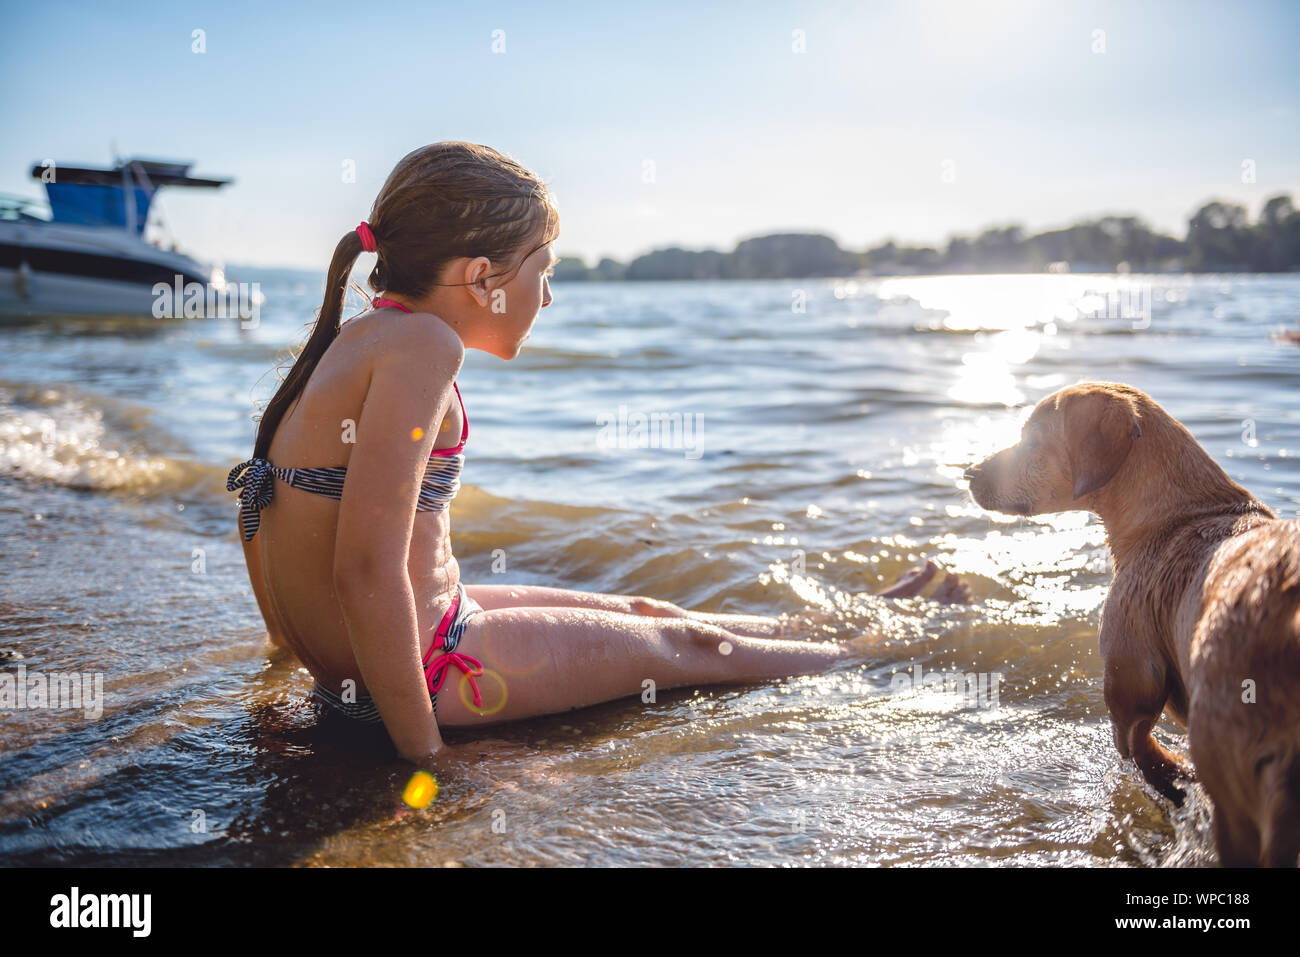 Girl sitting on the beach with a small yellow dog Stock Photo